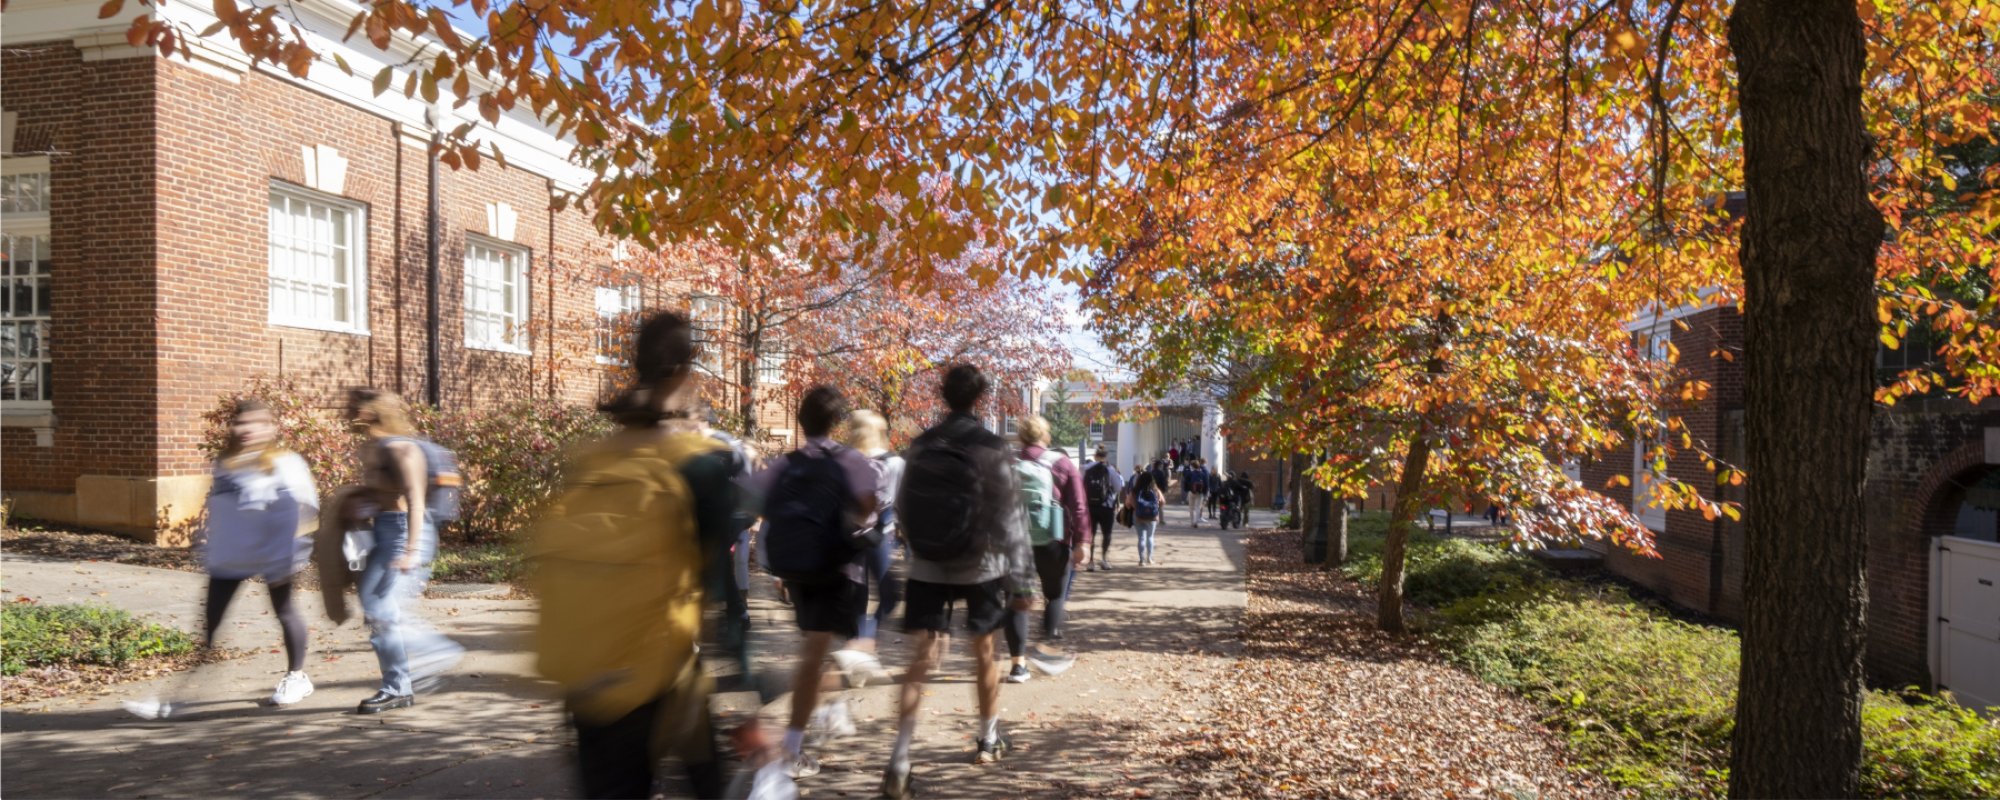 Students walking in front of brick building with fall leaves